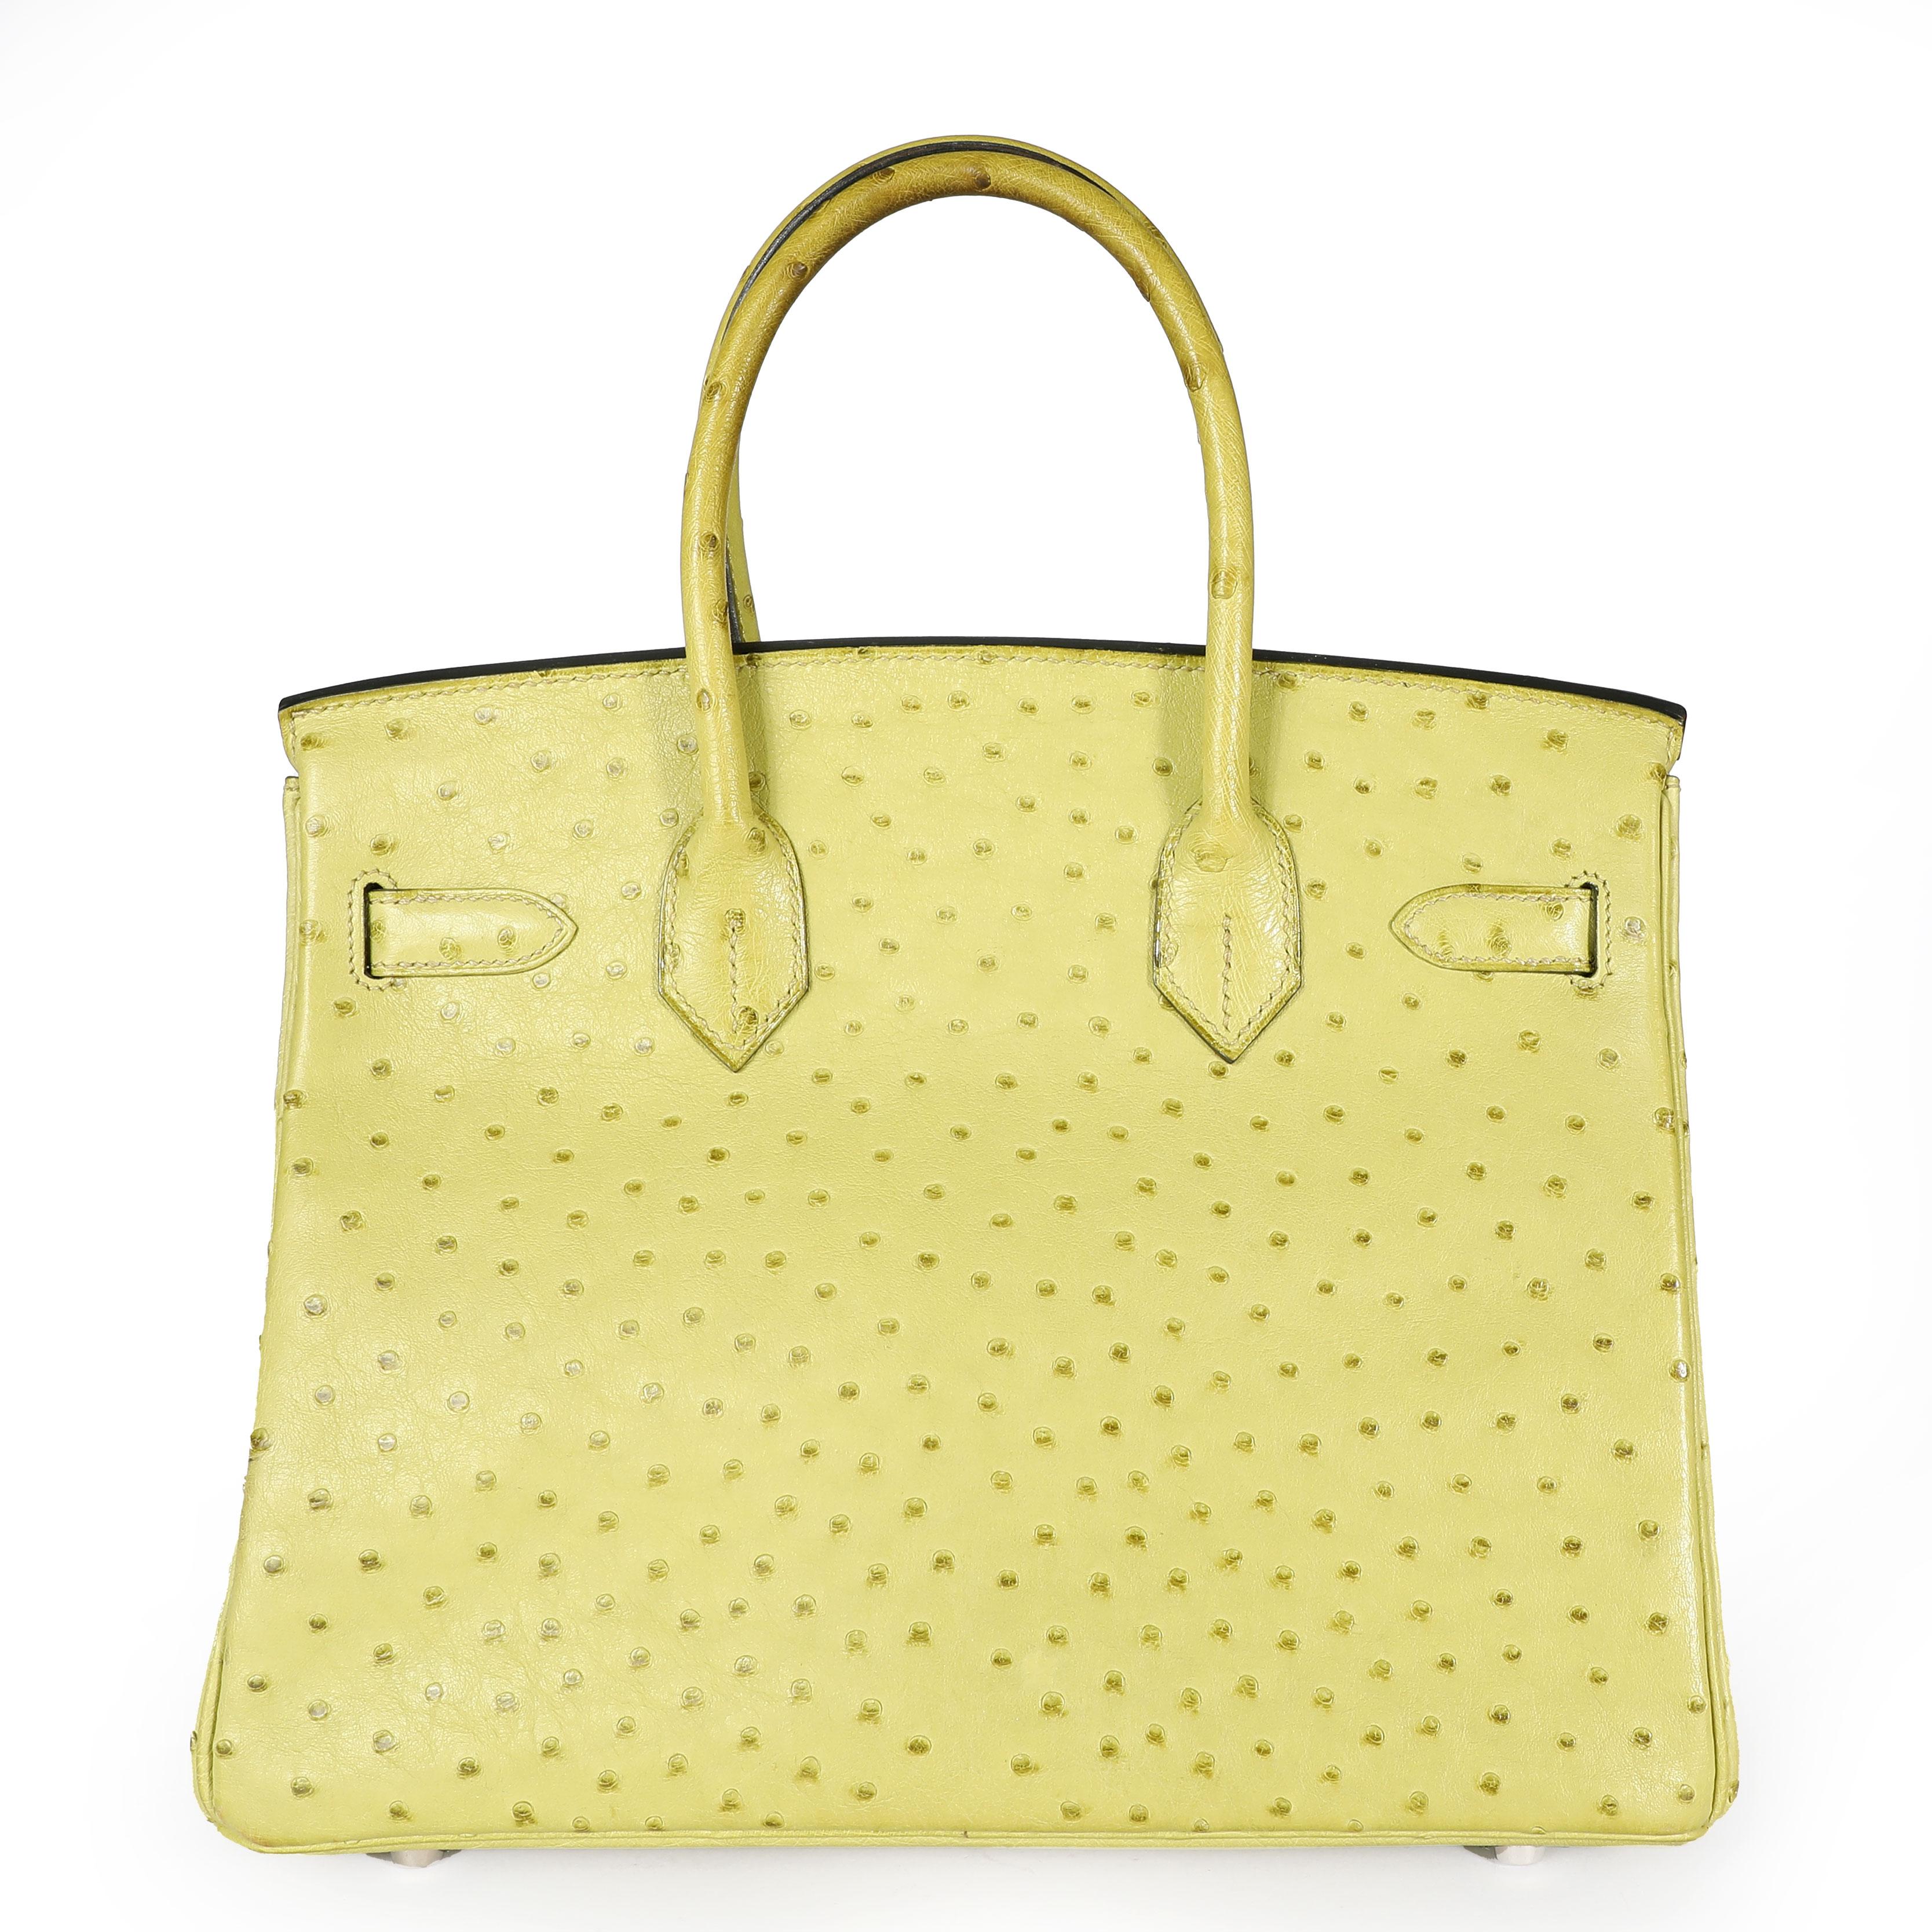 Hermès Vert Anis Ostrich Birkin 30 PHW
SKU: 108517

The holy grail of handbags: the Hermès Birkin. First introduced in 1984, the Birkin is crafted entirely by hand over the course of 18 hours. Highly covetable and collectible, this bag is featured